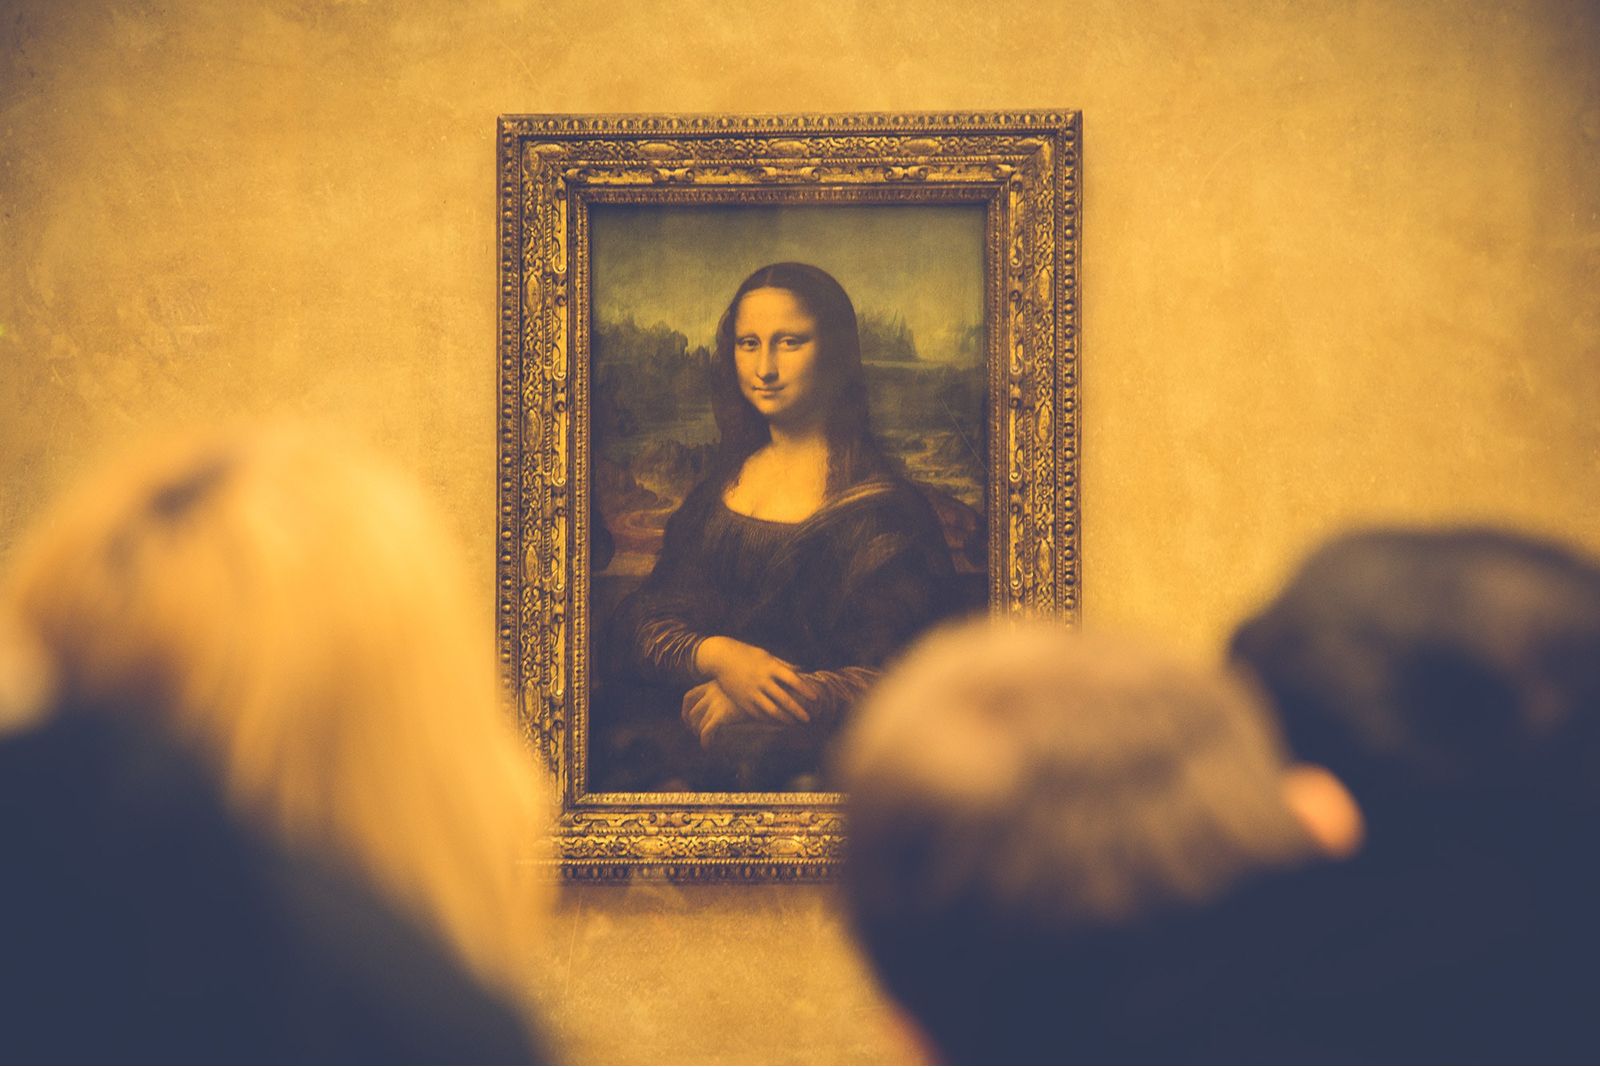 Mona Lisa brought to life Samsung AI makes famous painting move and speak image 1